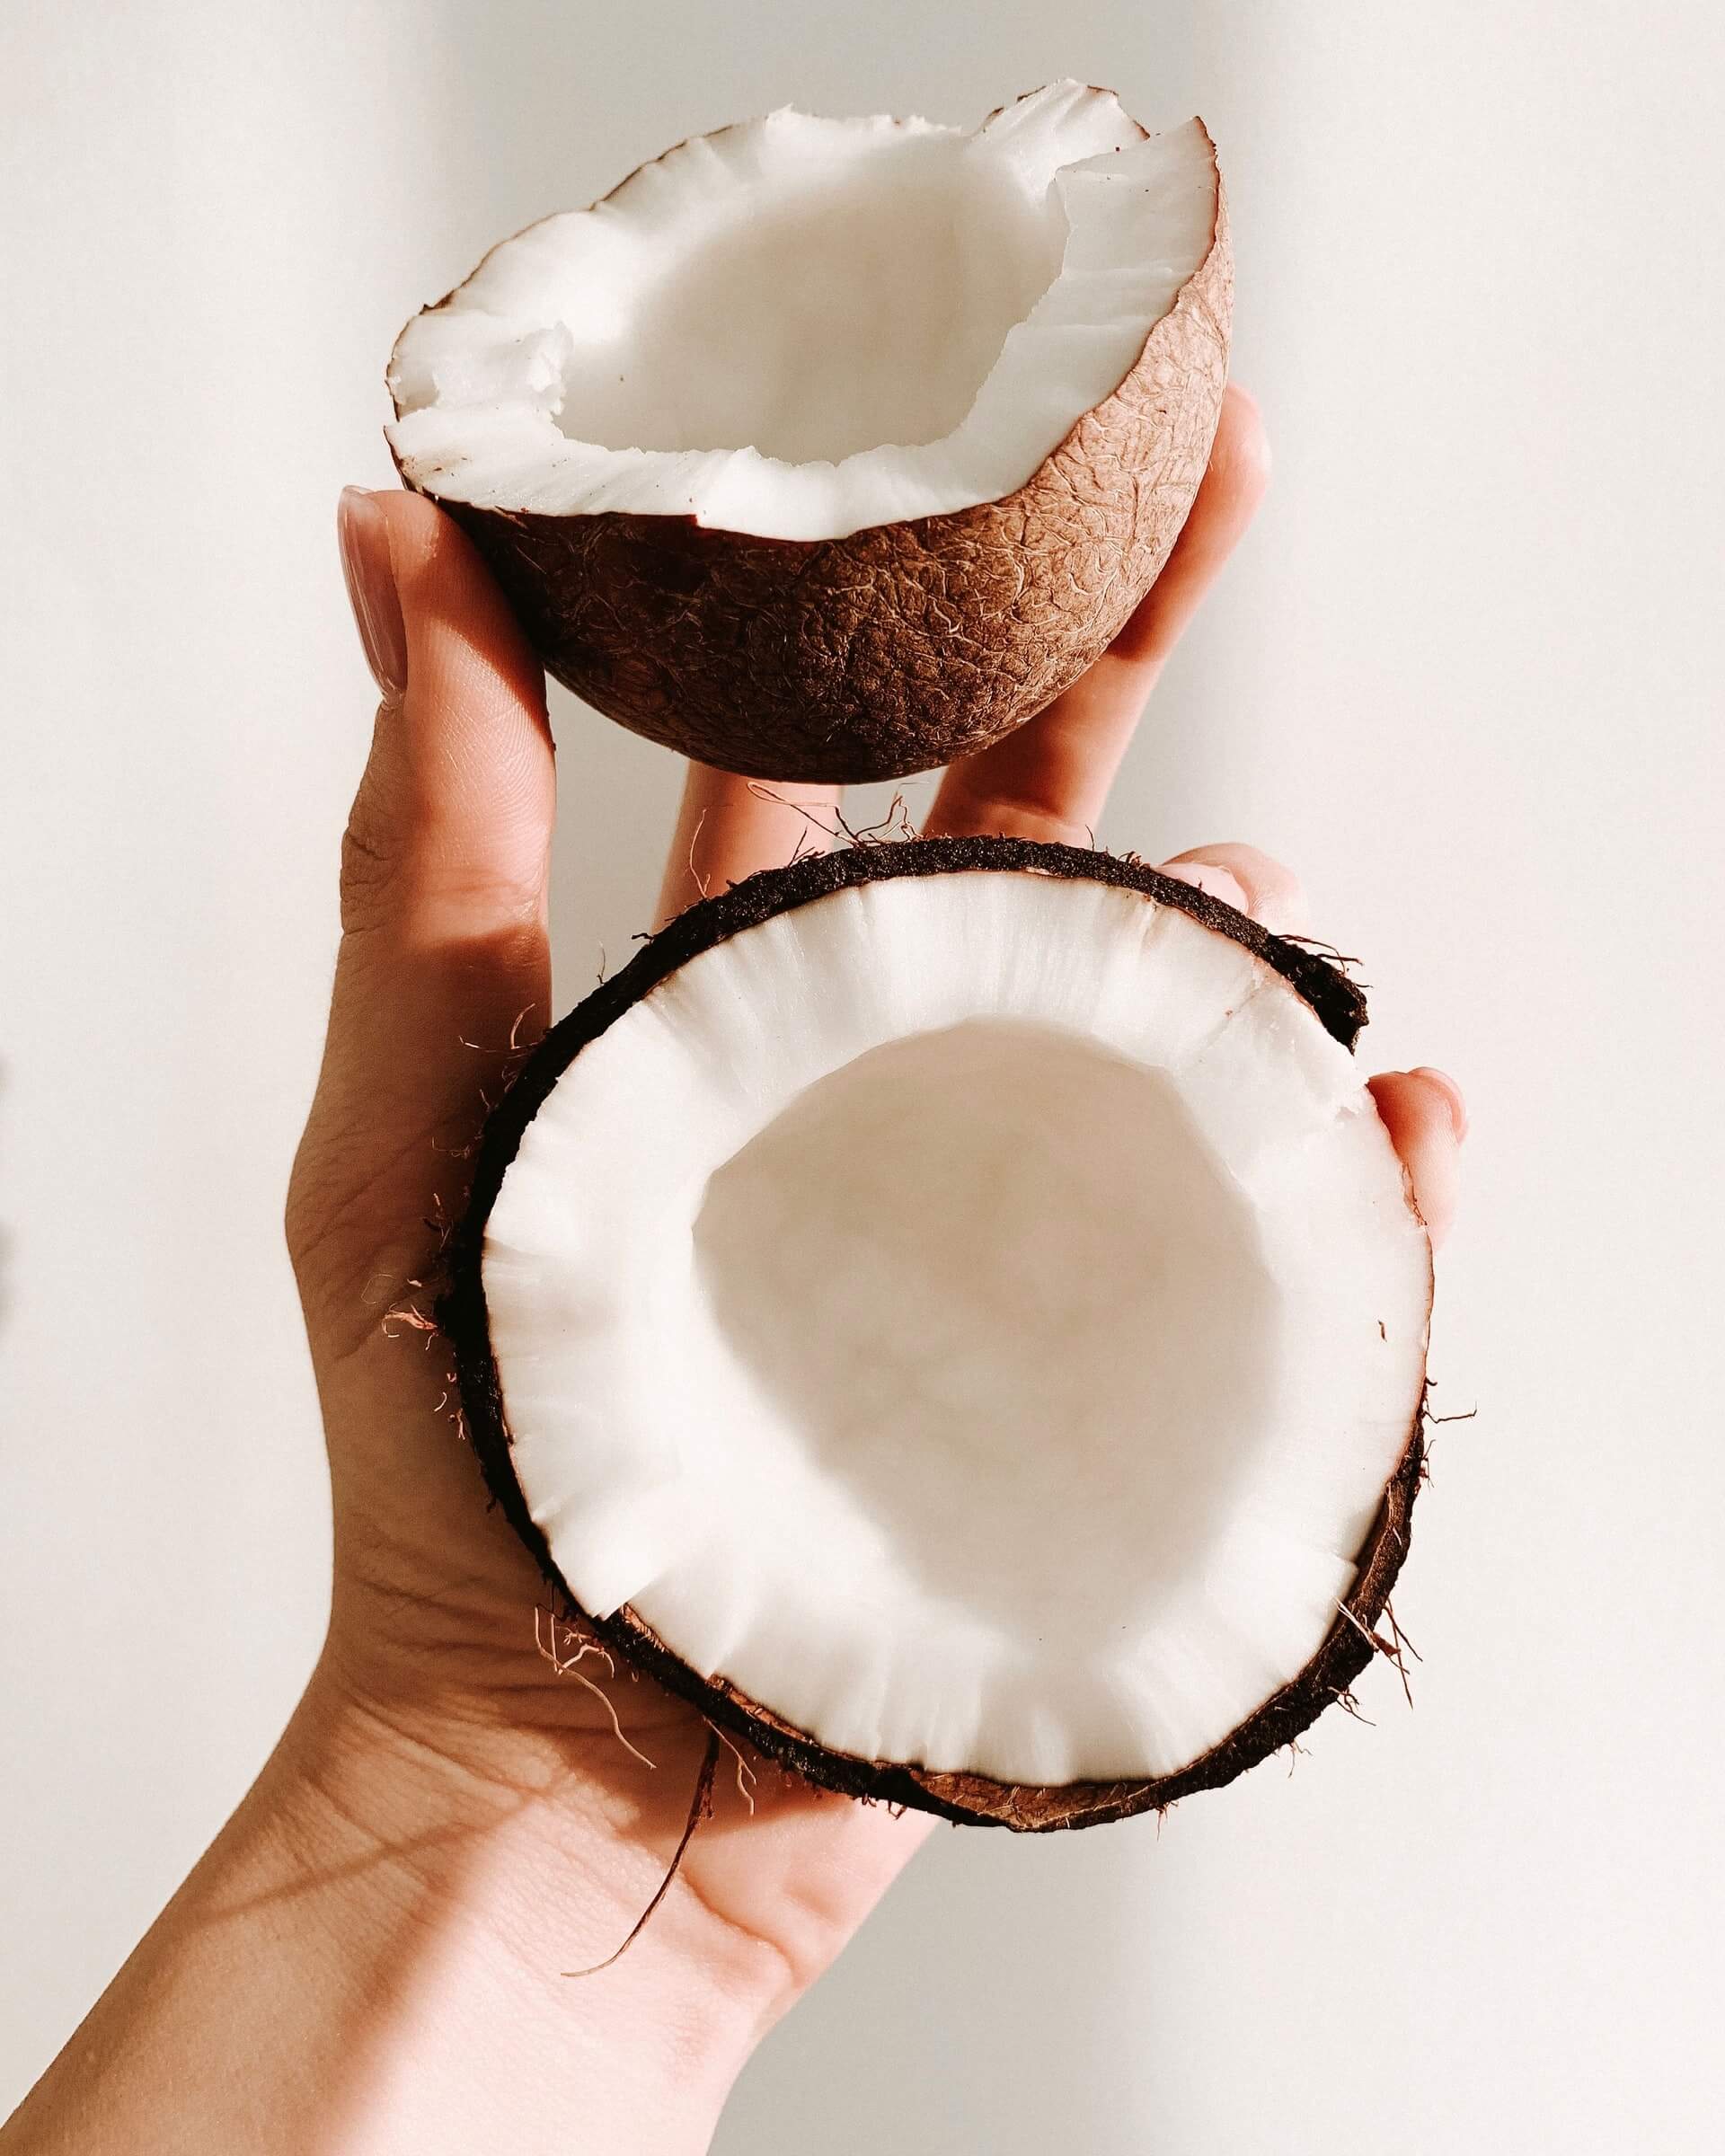 Opened coconut in a hand